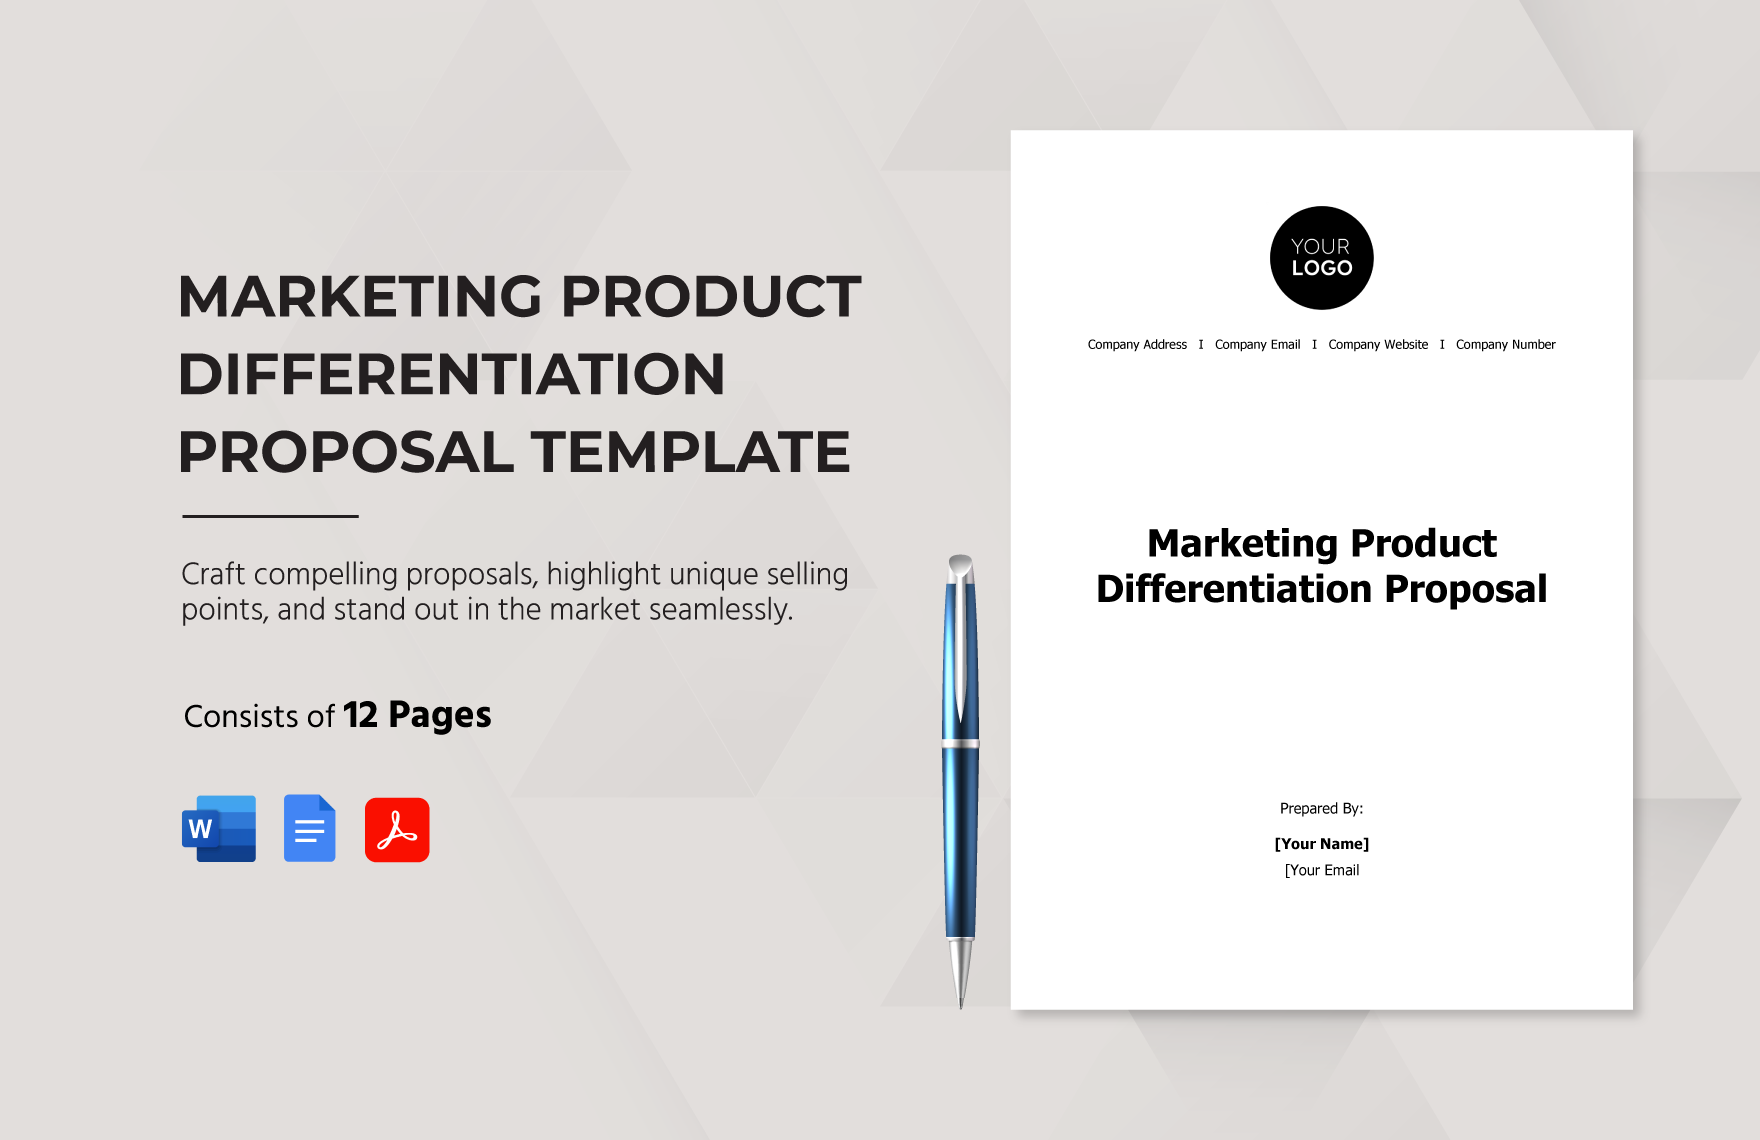 Marketing Product Differentiation Proposal Template